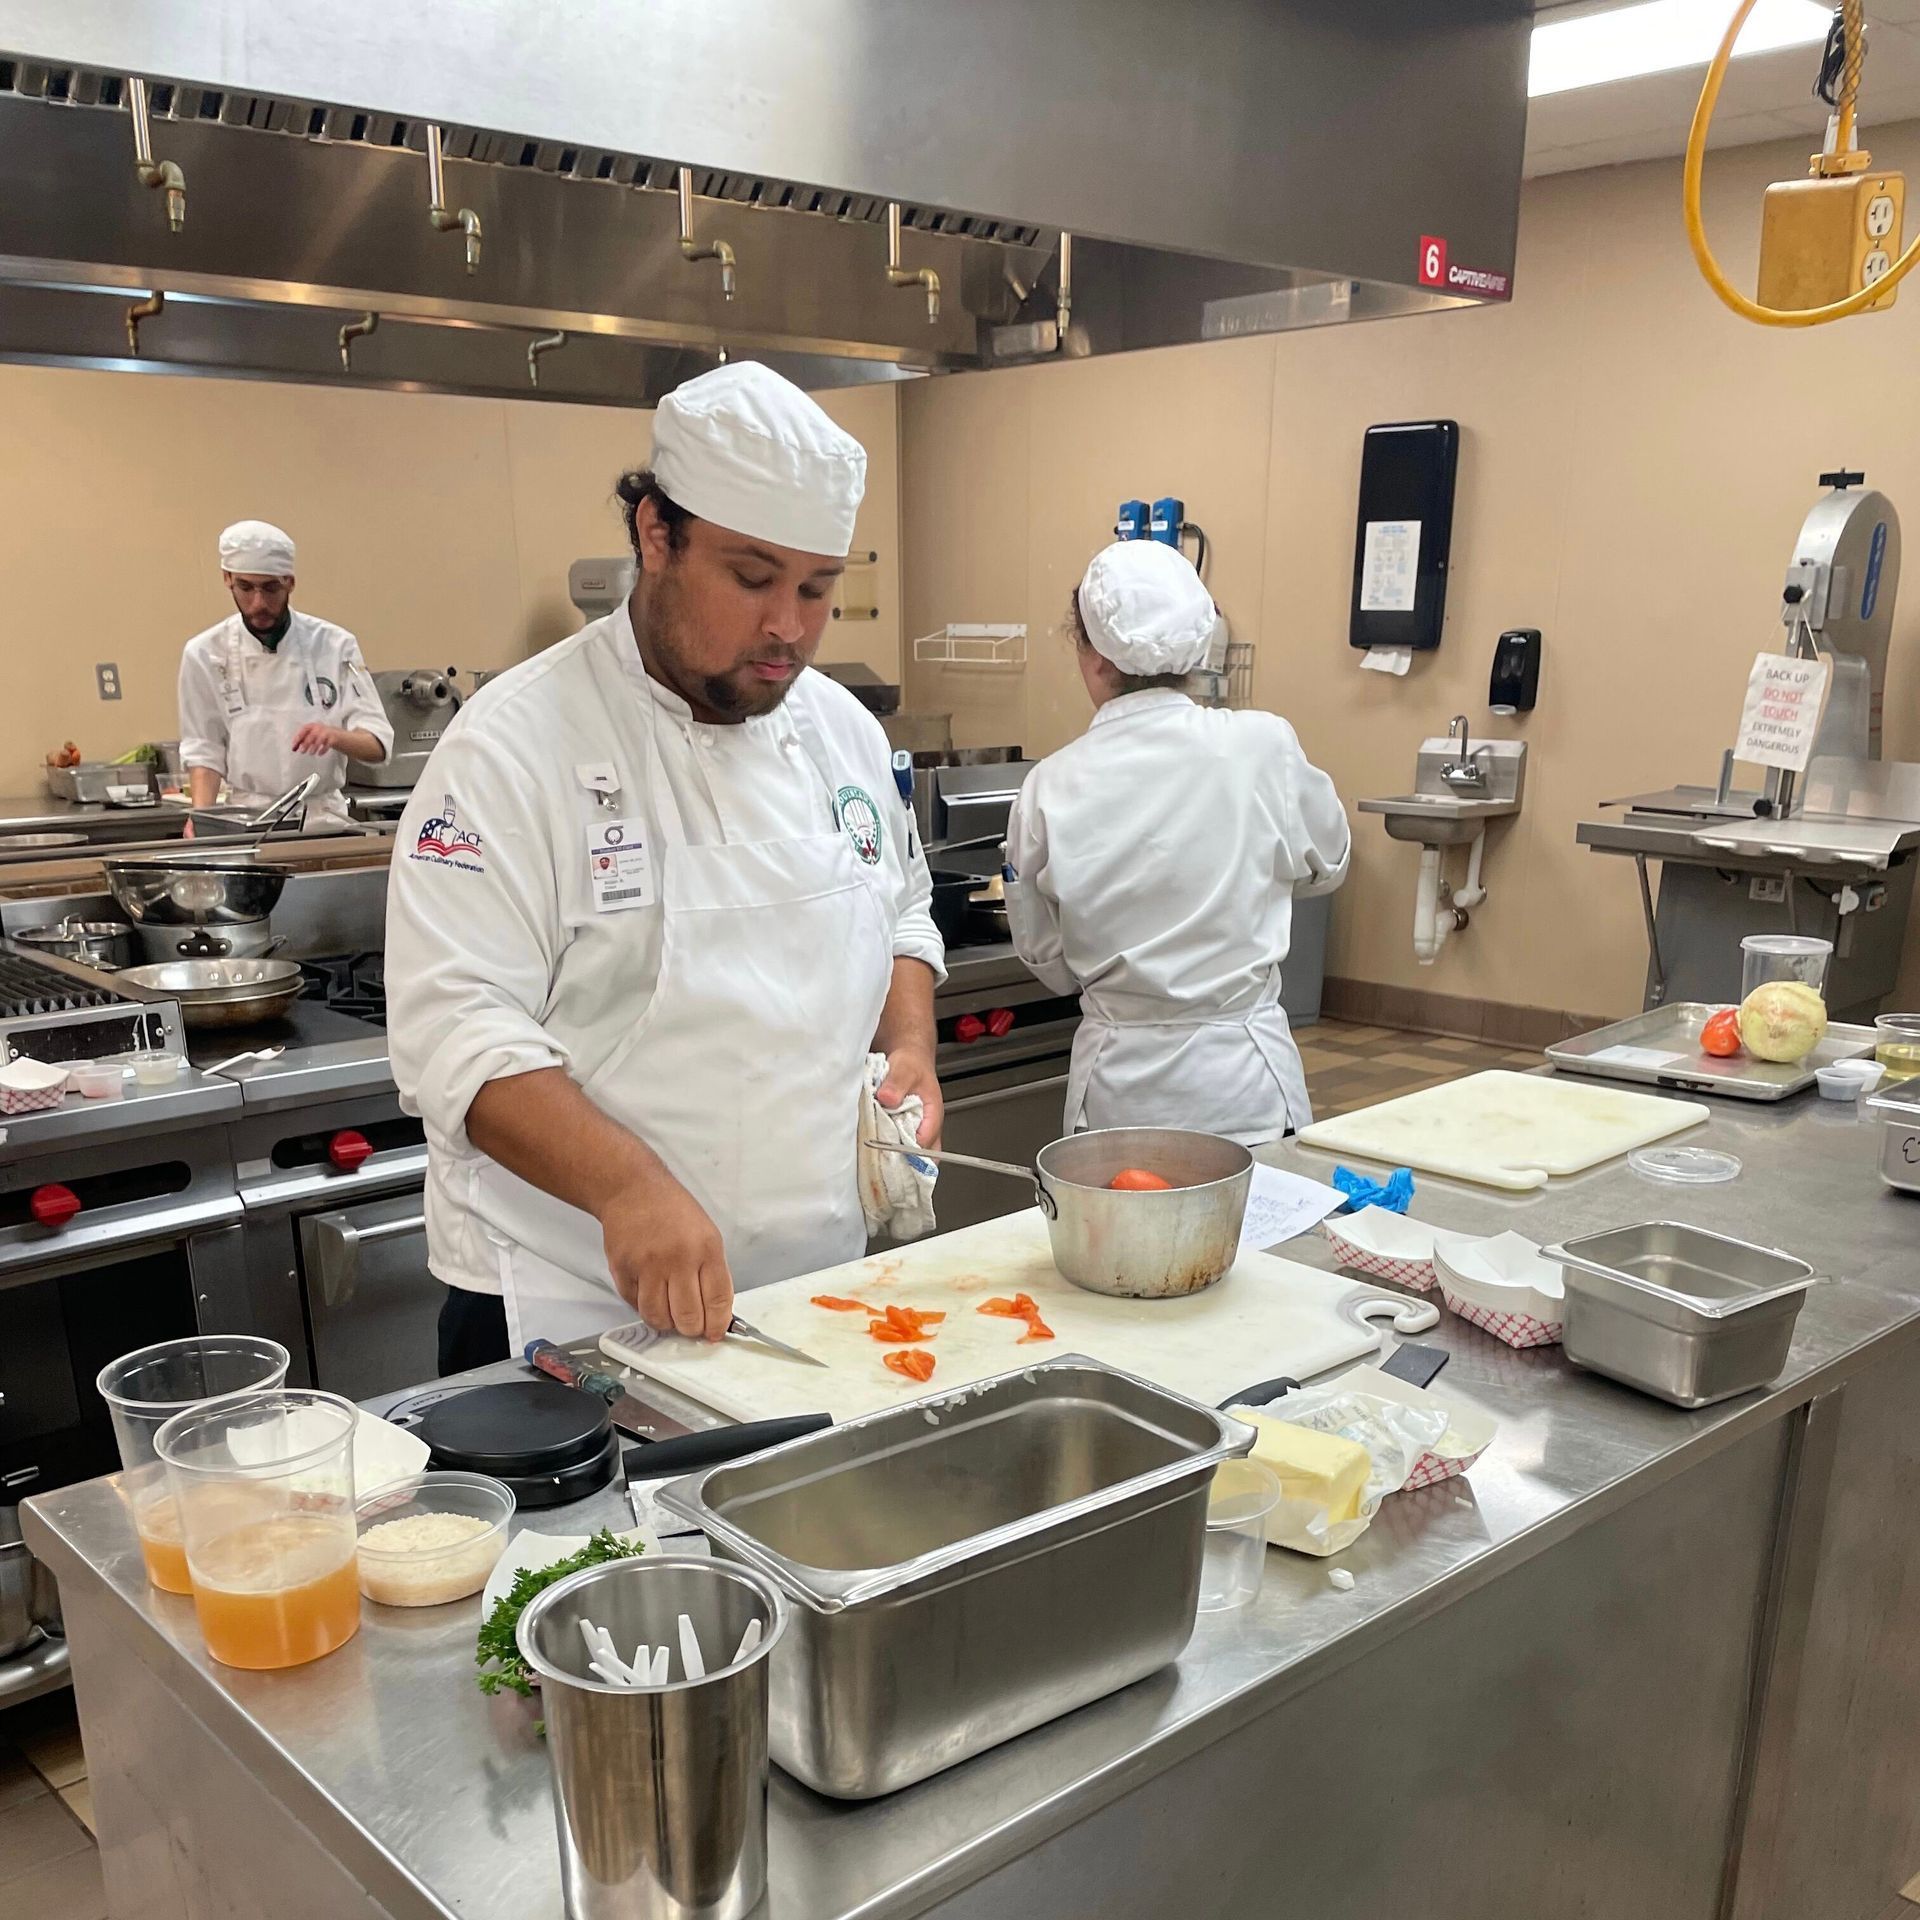 Transferring to Culinary School: What is Required to Change Schools and Become a Culinary Profession